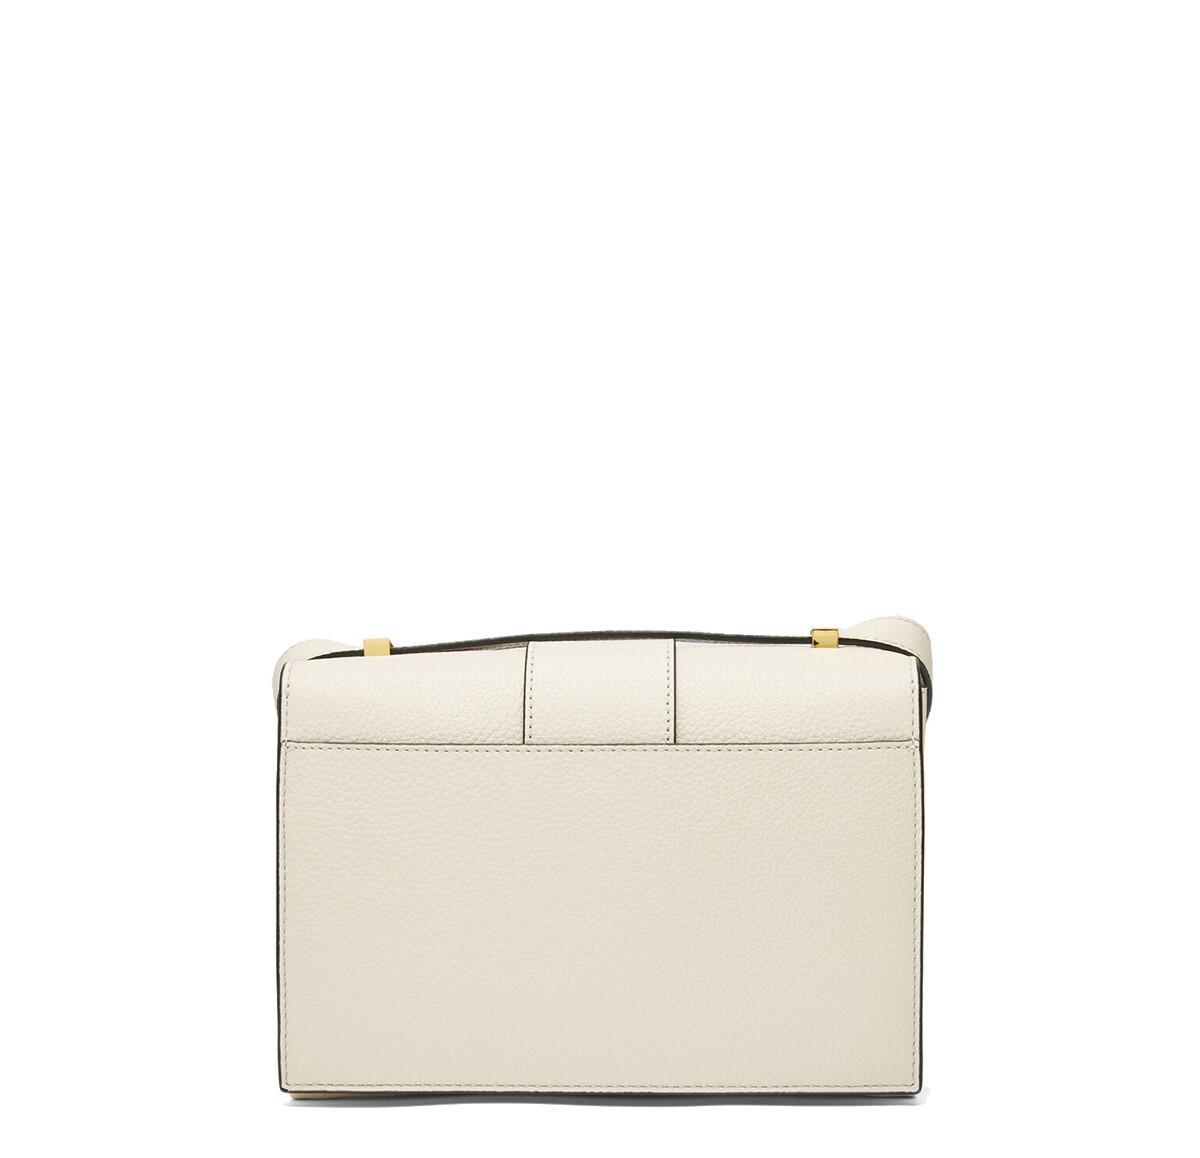 Coccinelle Ivory Grainy Leather Arlettis Flap Shoulder Bag at FORZIERI